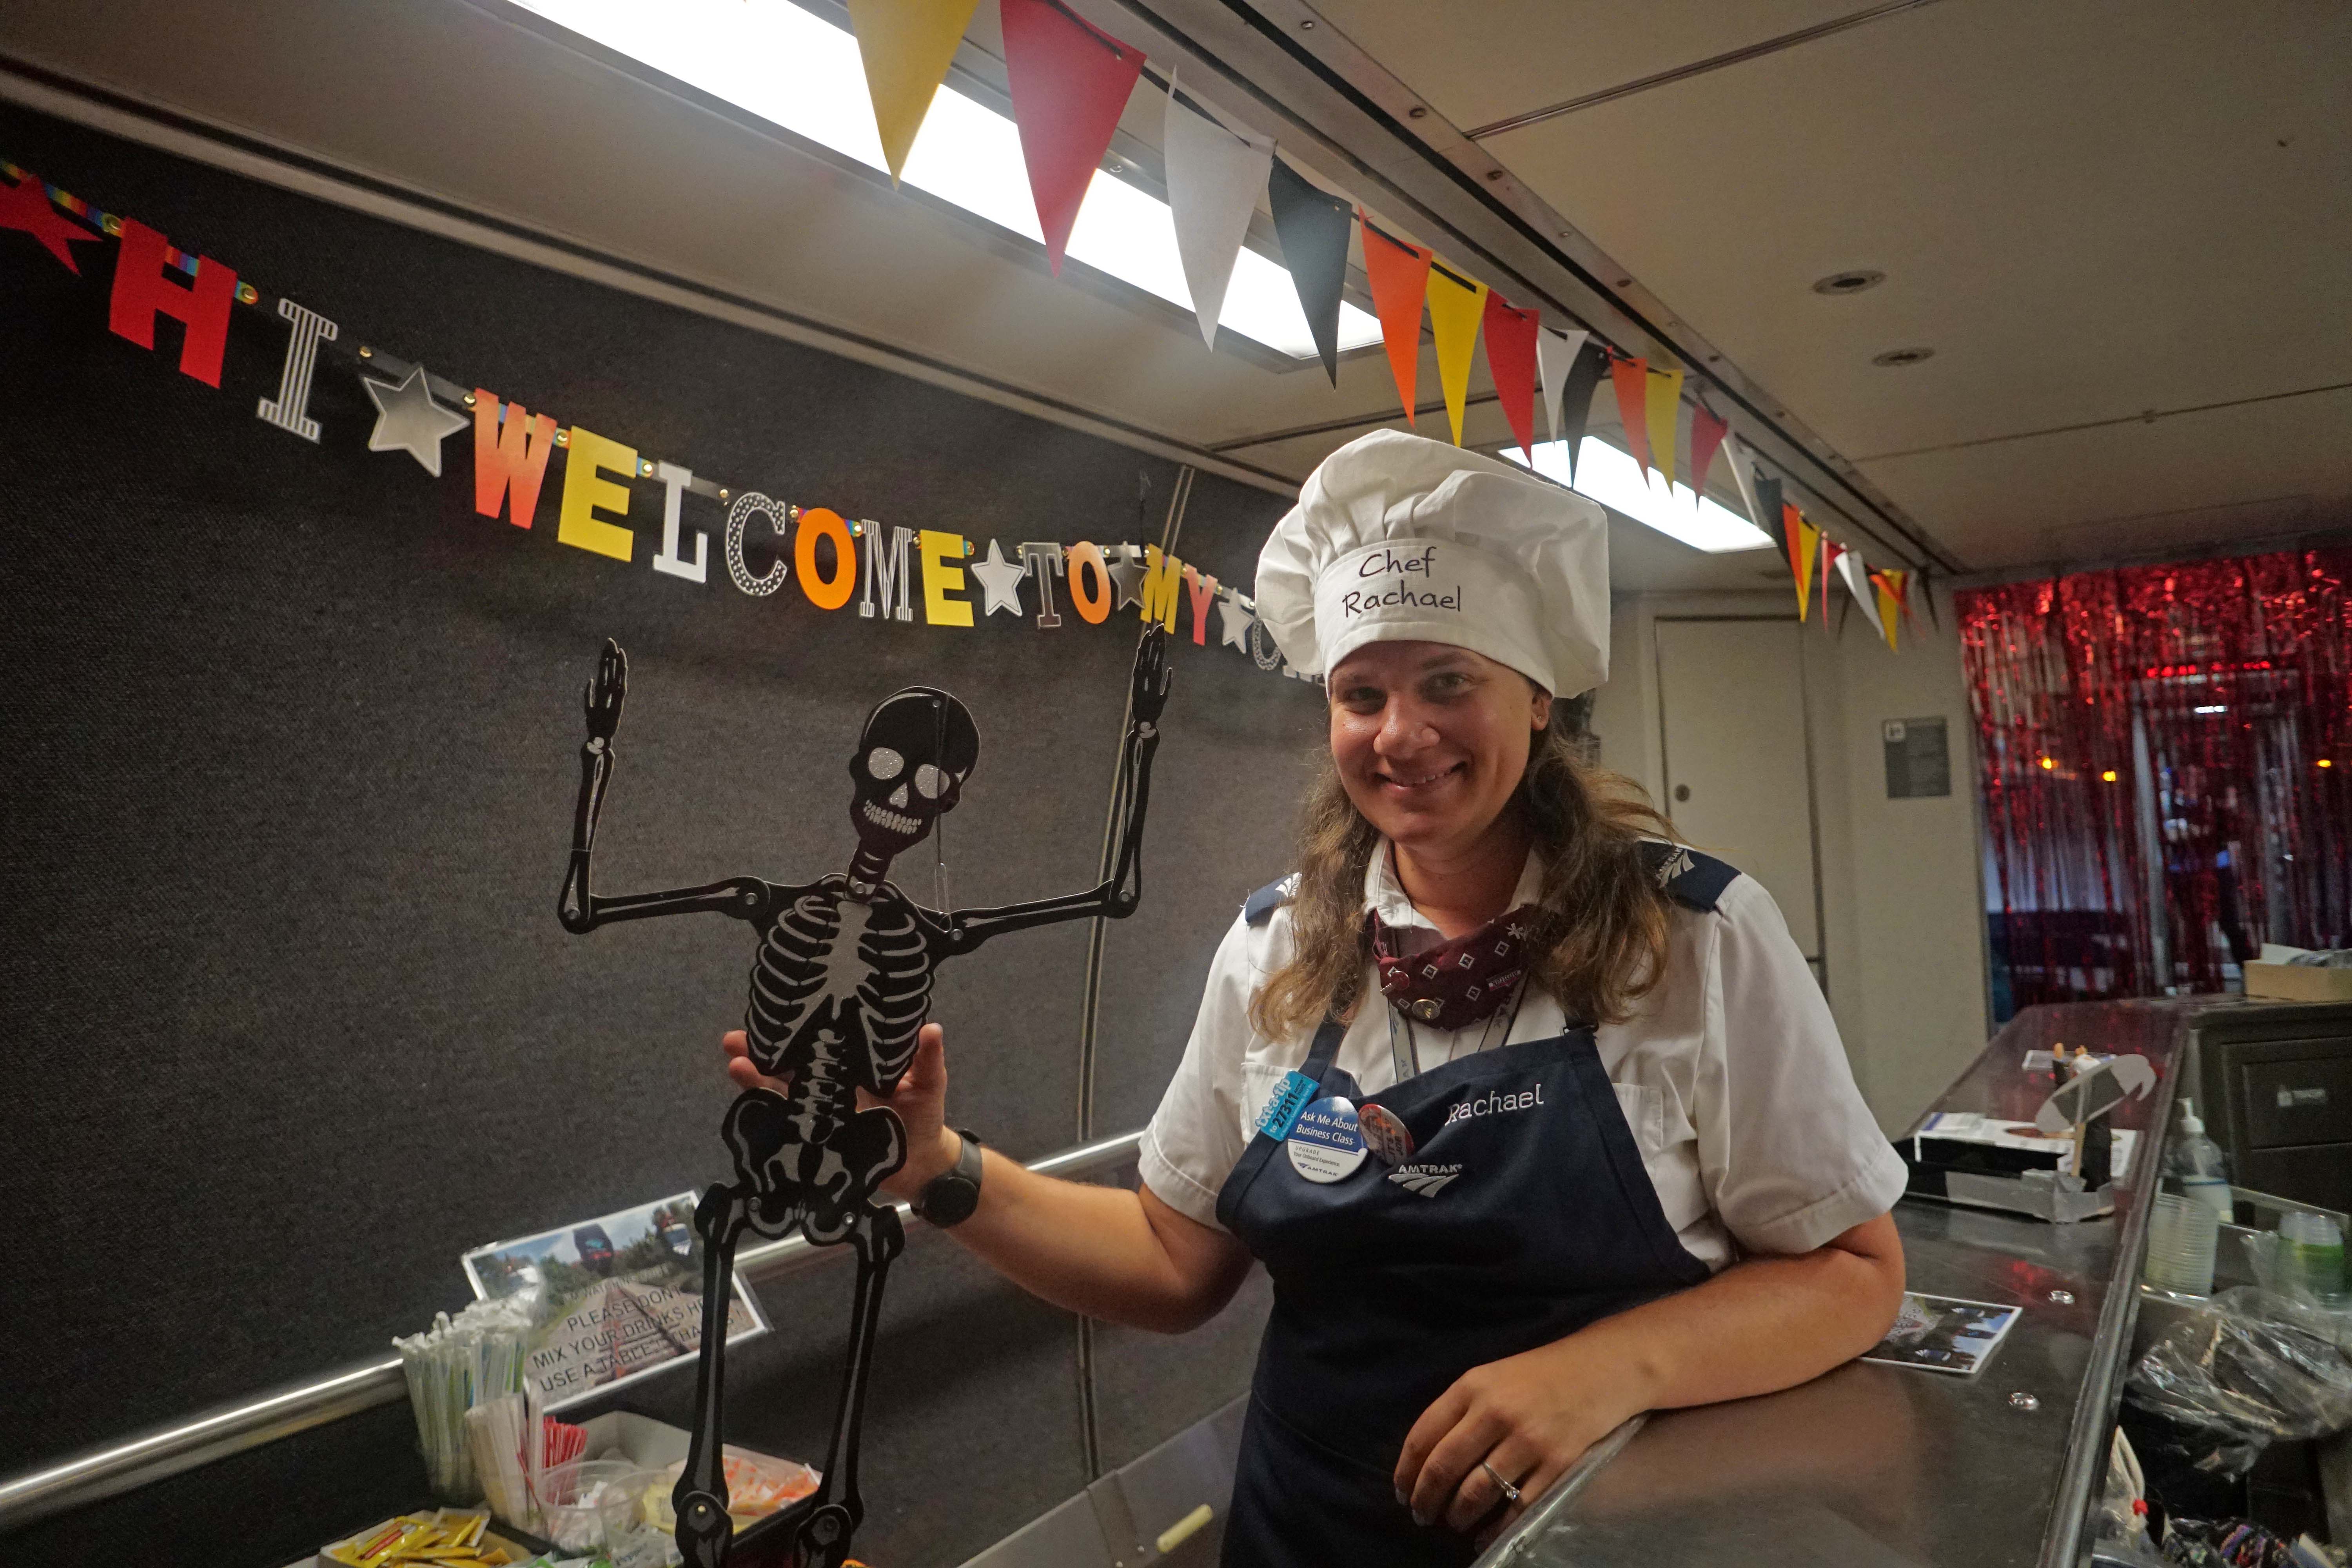 Woman with chefs hat, and haloween decorations